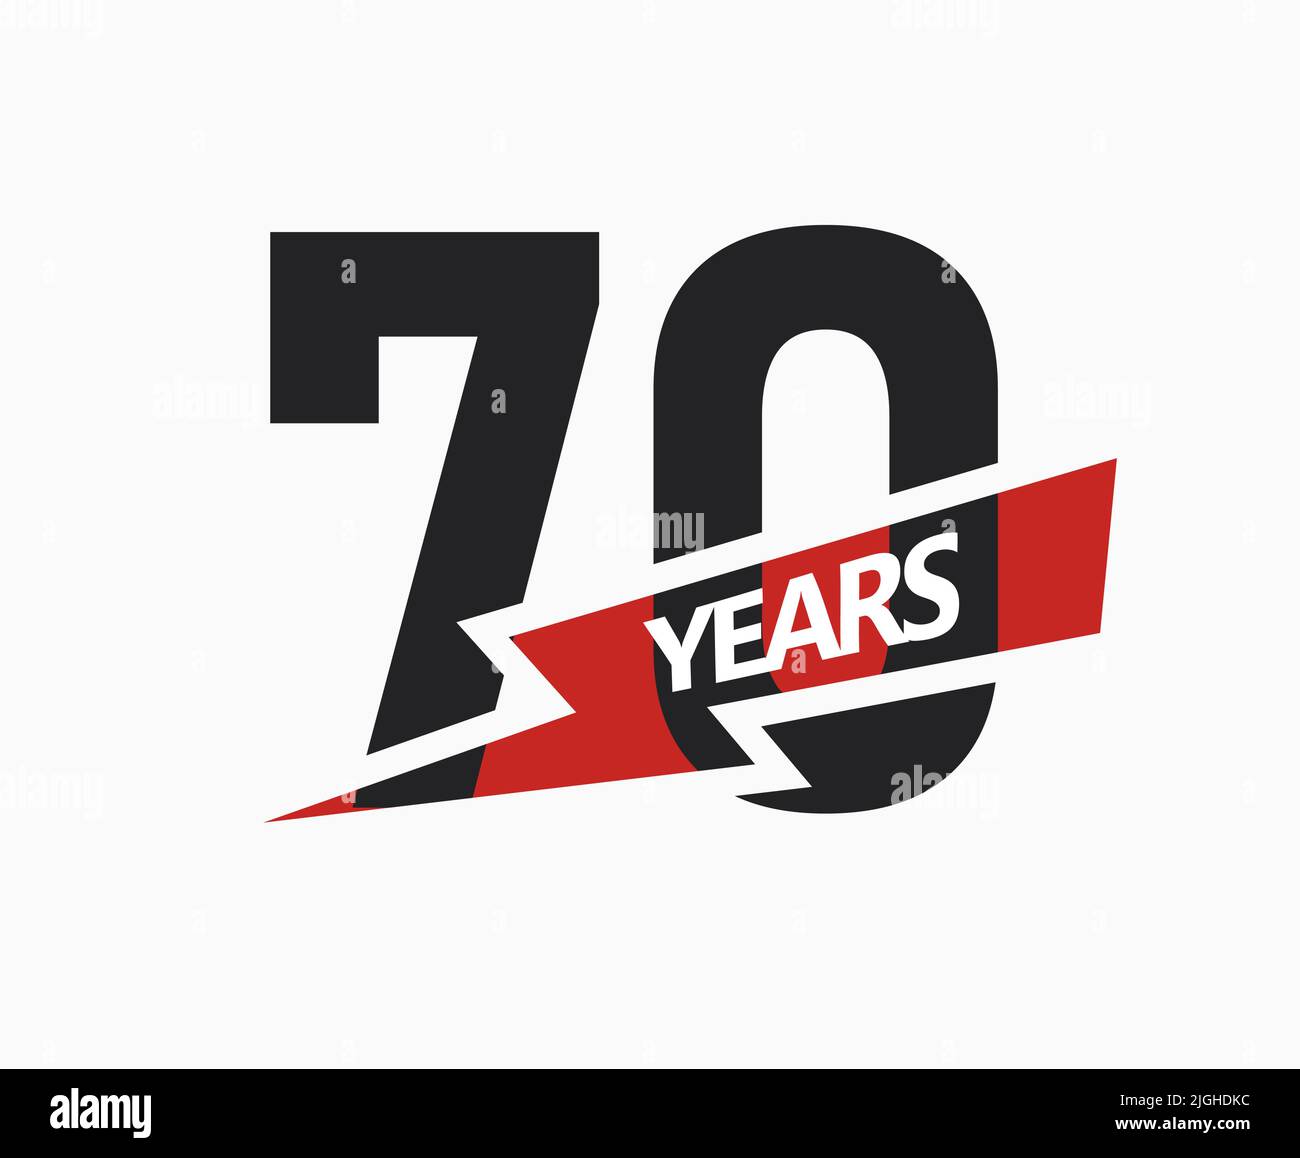 70 years of business, jubilee logo. 70th Anniversary sign. Modern graphic design for company birthday. Isolated vector illustration. Stock Vector